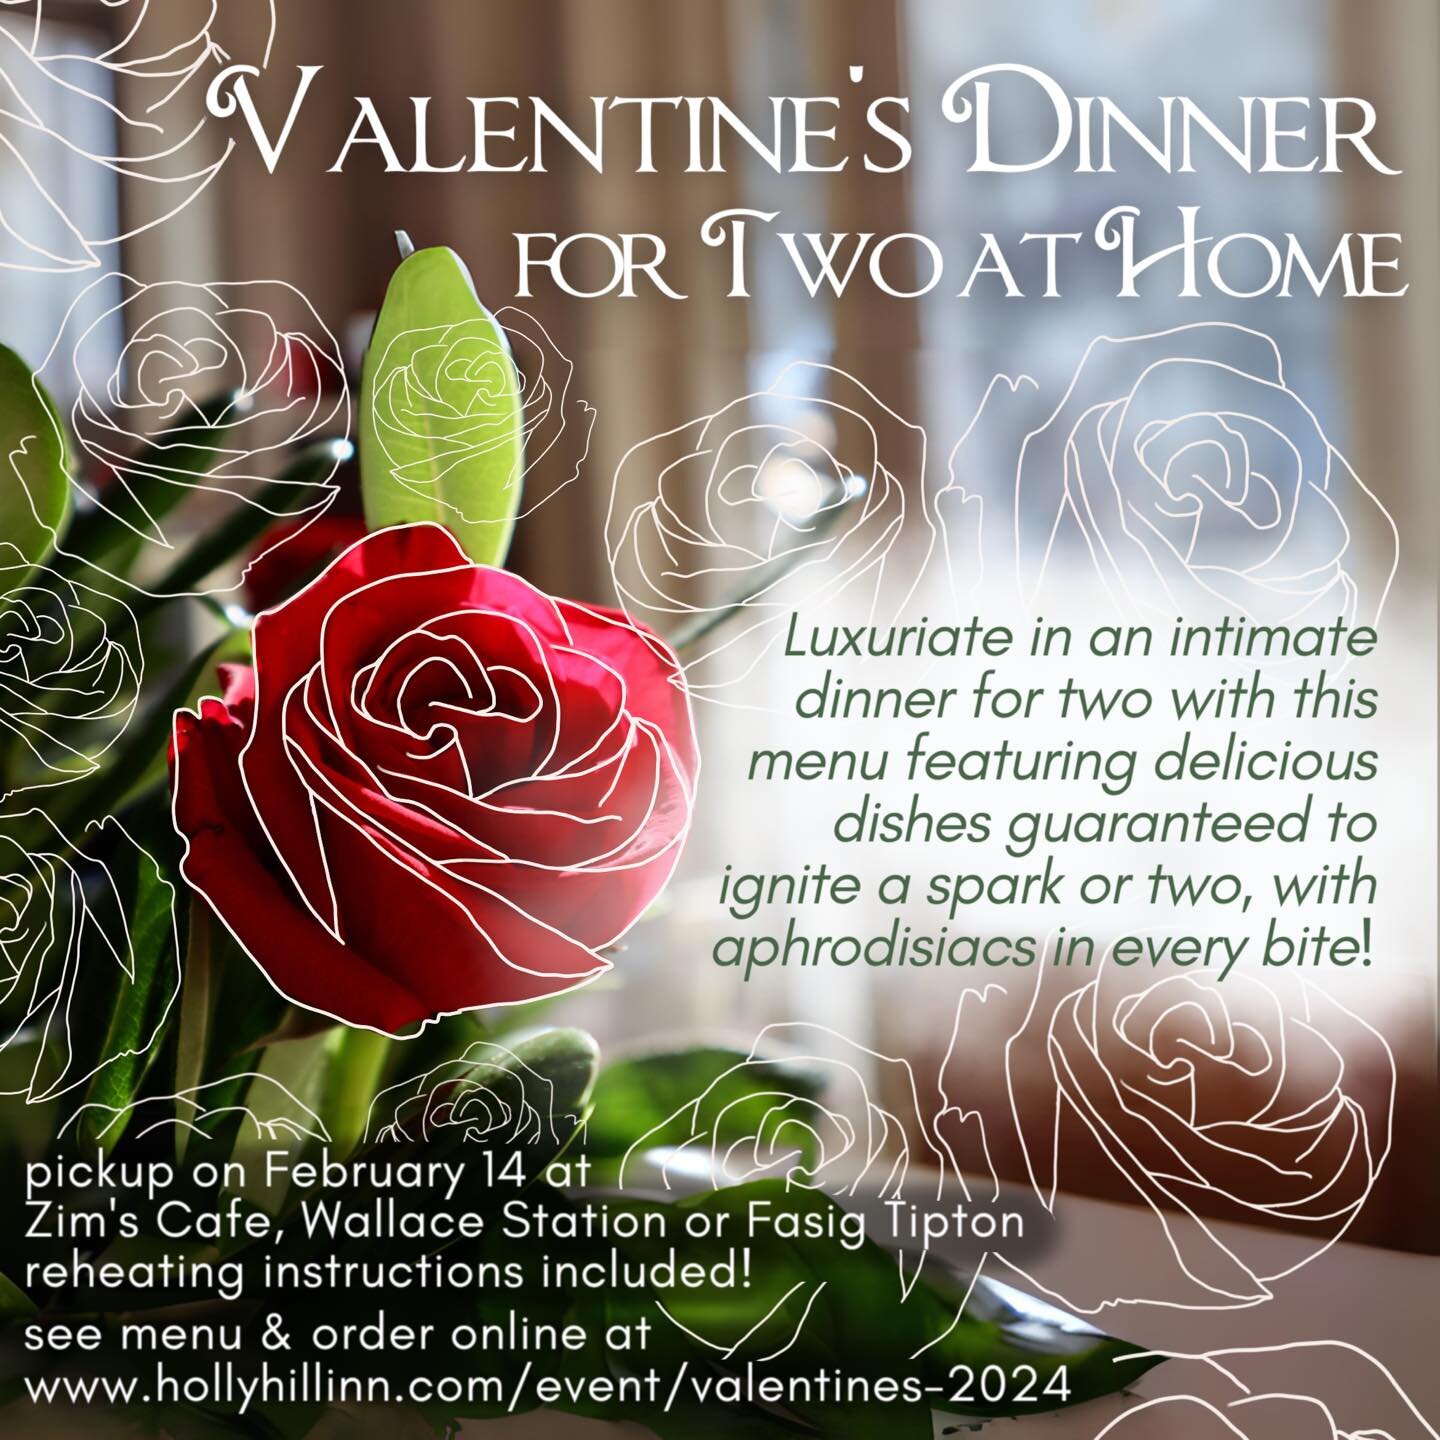 Want to impress your partner this Valentine&rsquo;s Day by bringing home a professionally prepared dinner for two? All you have to do is get out the nice plates and light some candles. 
Order your Valentine&rsquo;s Day Dinner for Two now while they l